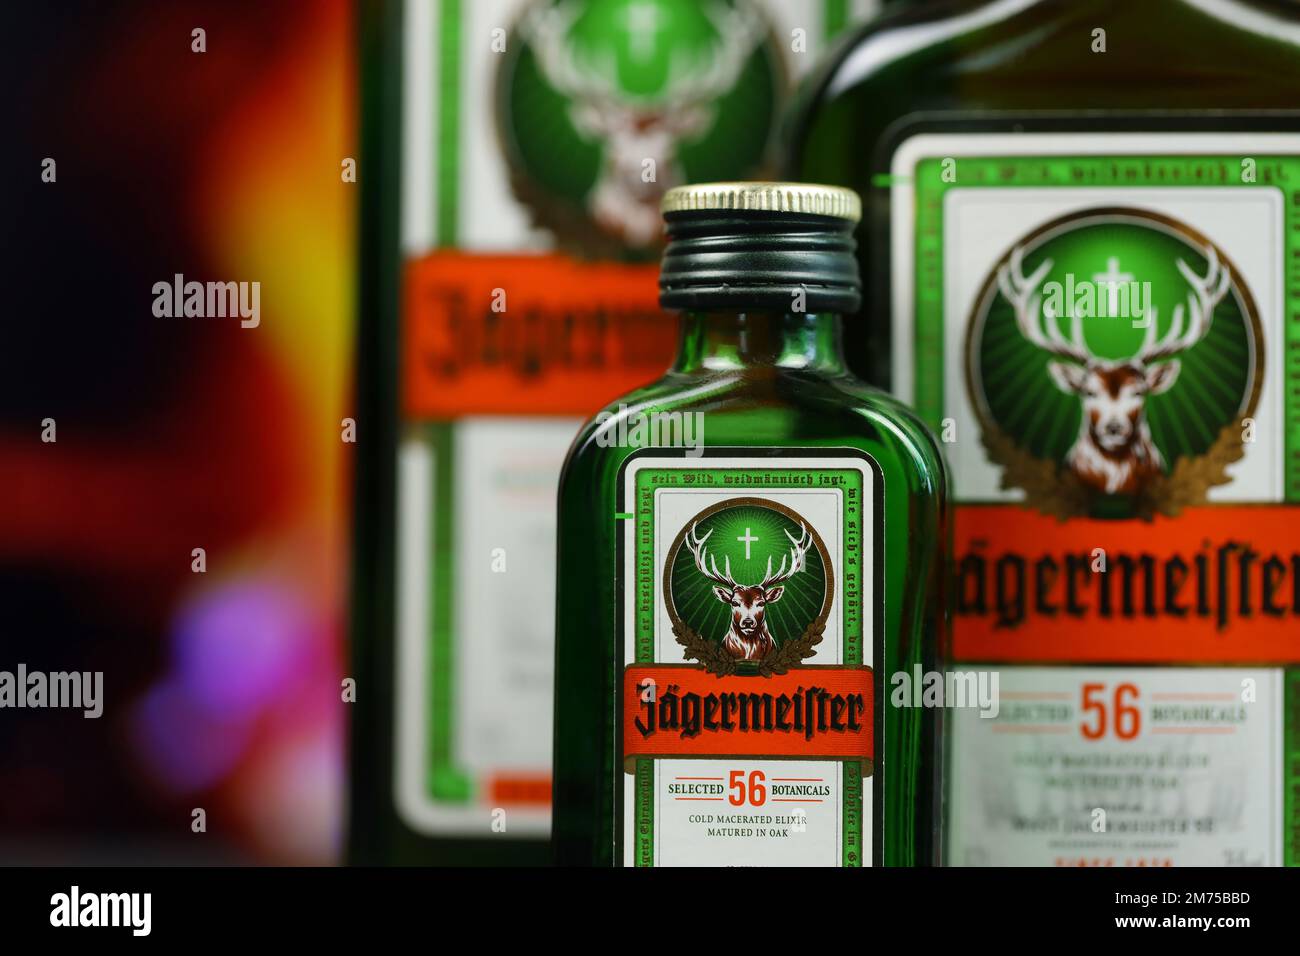 KYIV, UKRAINE - MAY 4, 2022 Jagermeister original alcohol bottle on wooden table with red fireplace on background. Elite alcohol production Stock Photo